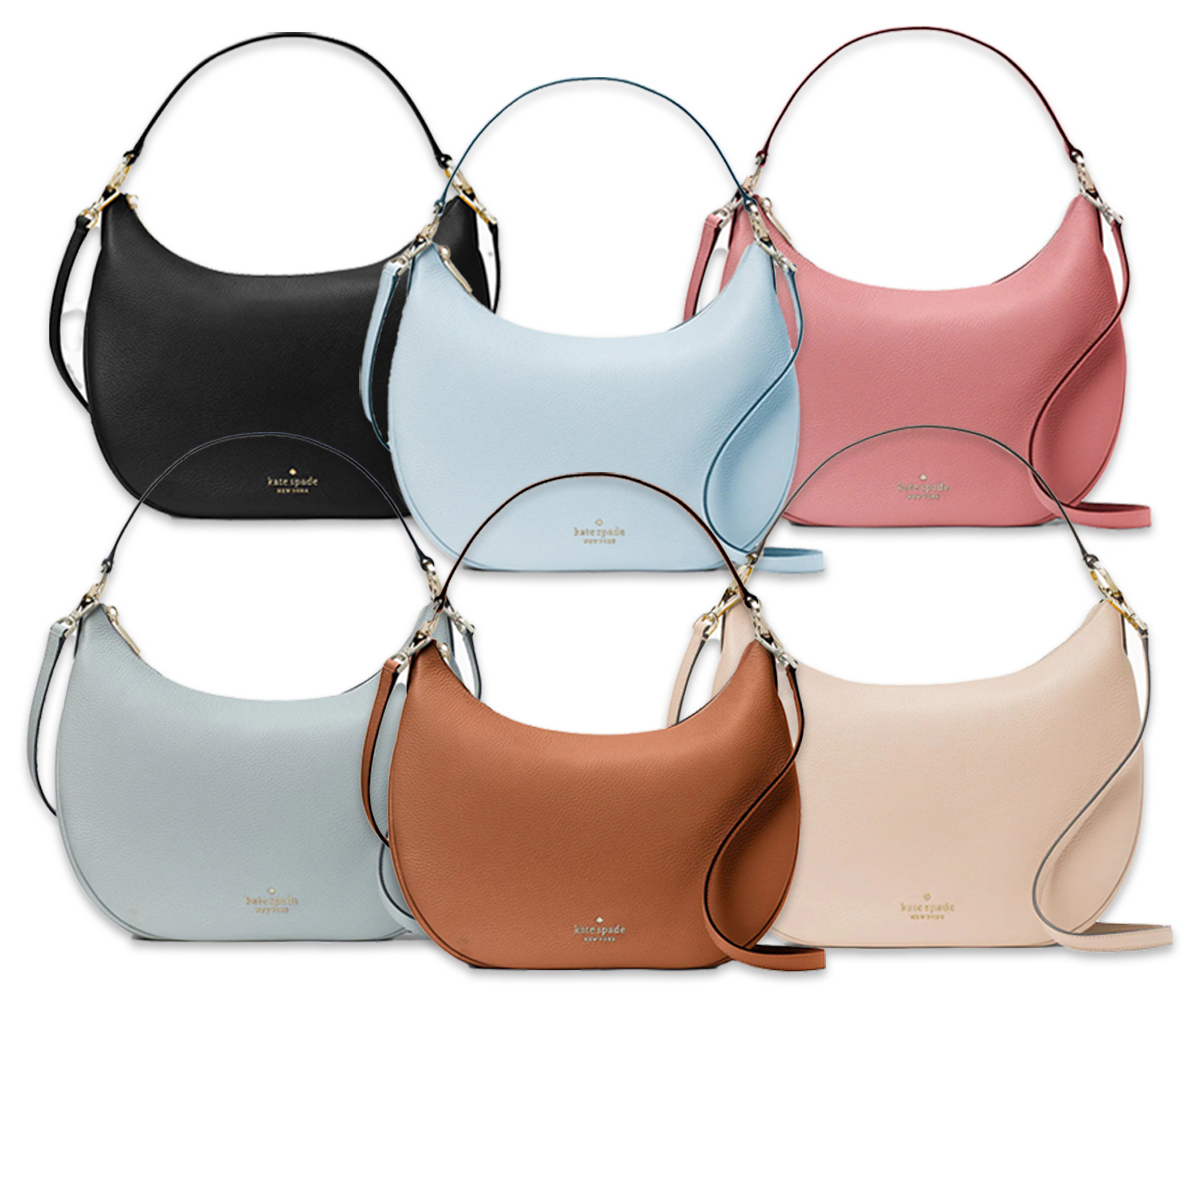 Kate Spade 24-Hour Flash Deal: Get a $260 Crossbody Bag for Just $59